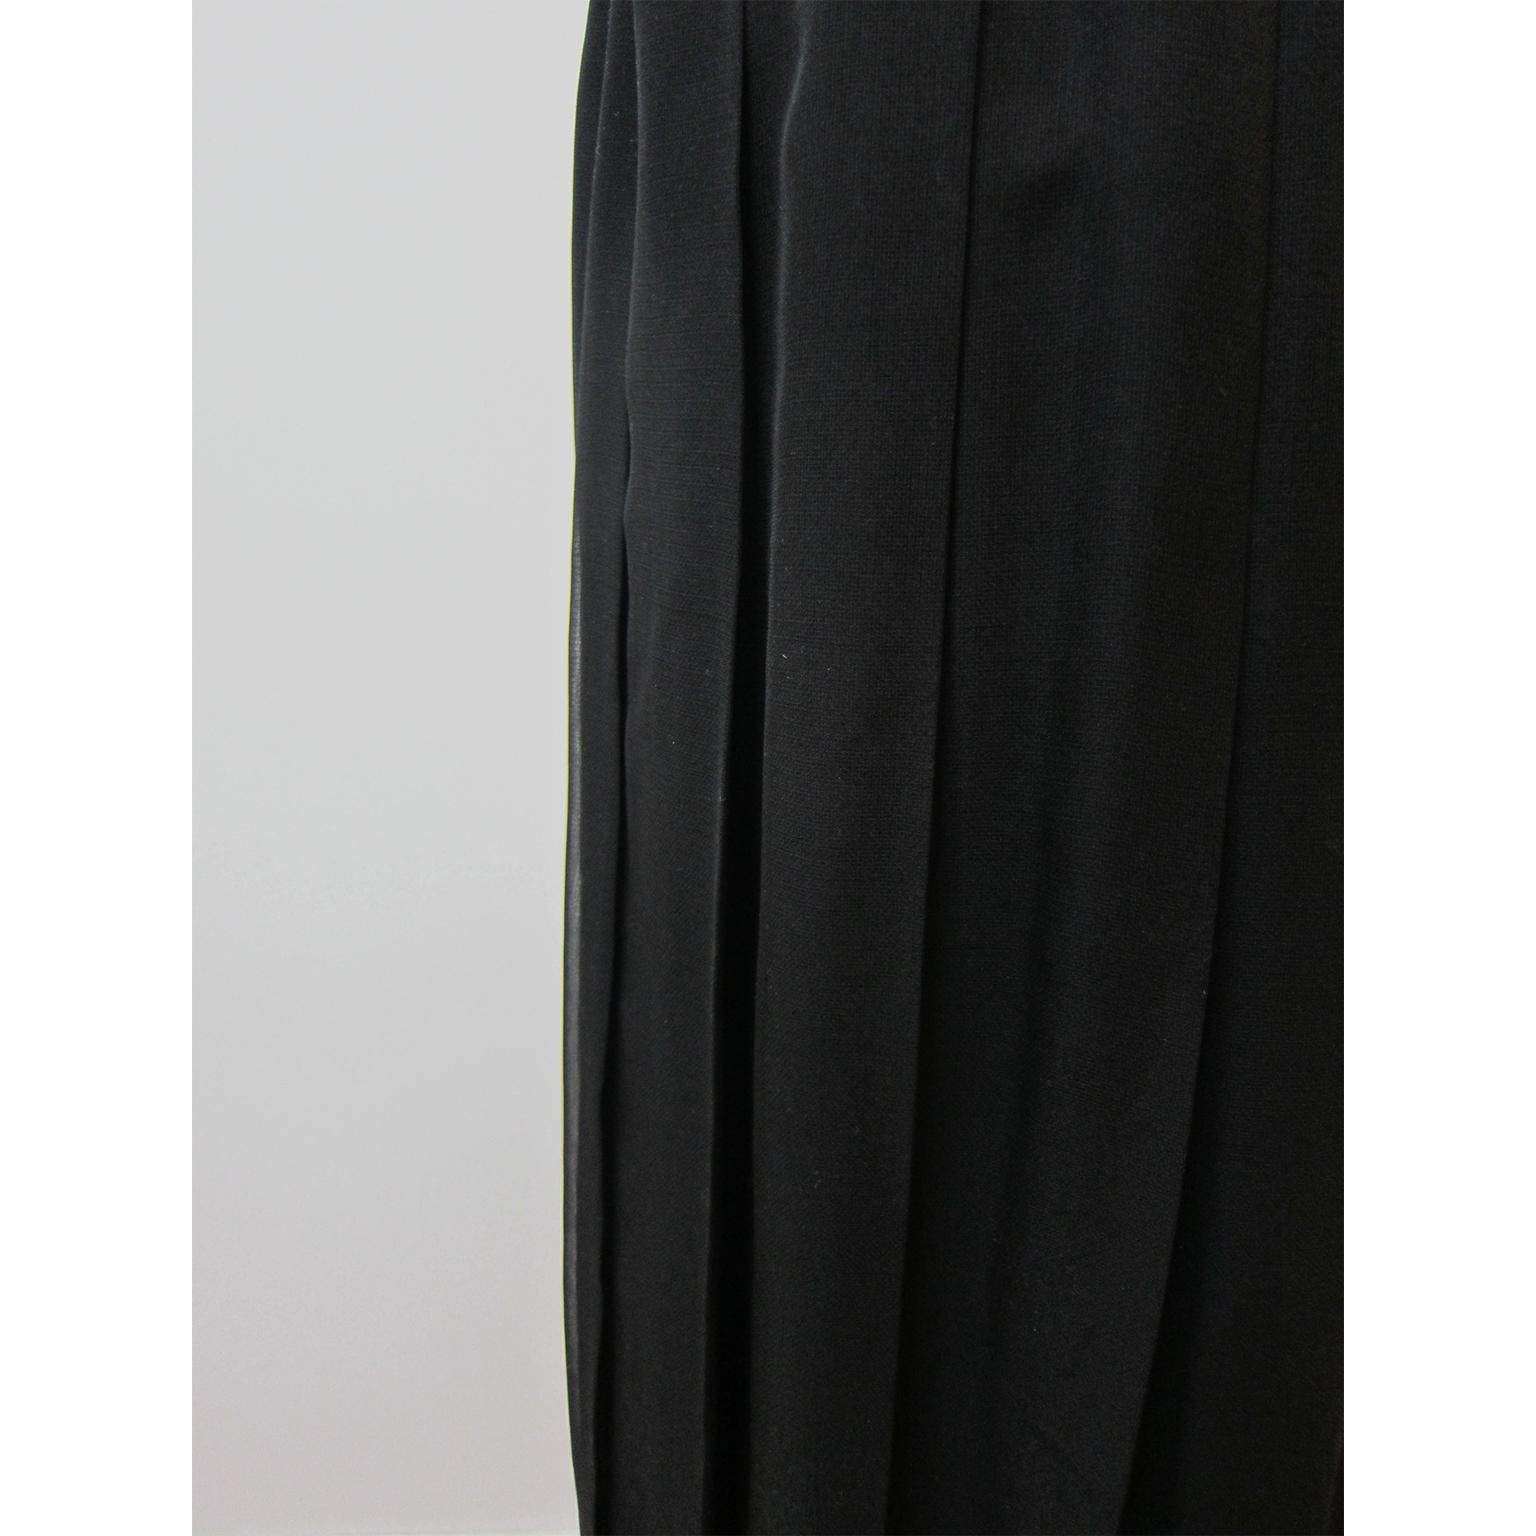 Comme des Garcons Layered Pleated Black Skirt AD 1996 For Sale 1